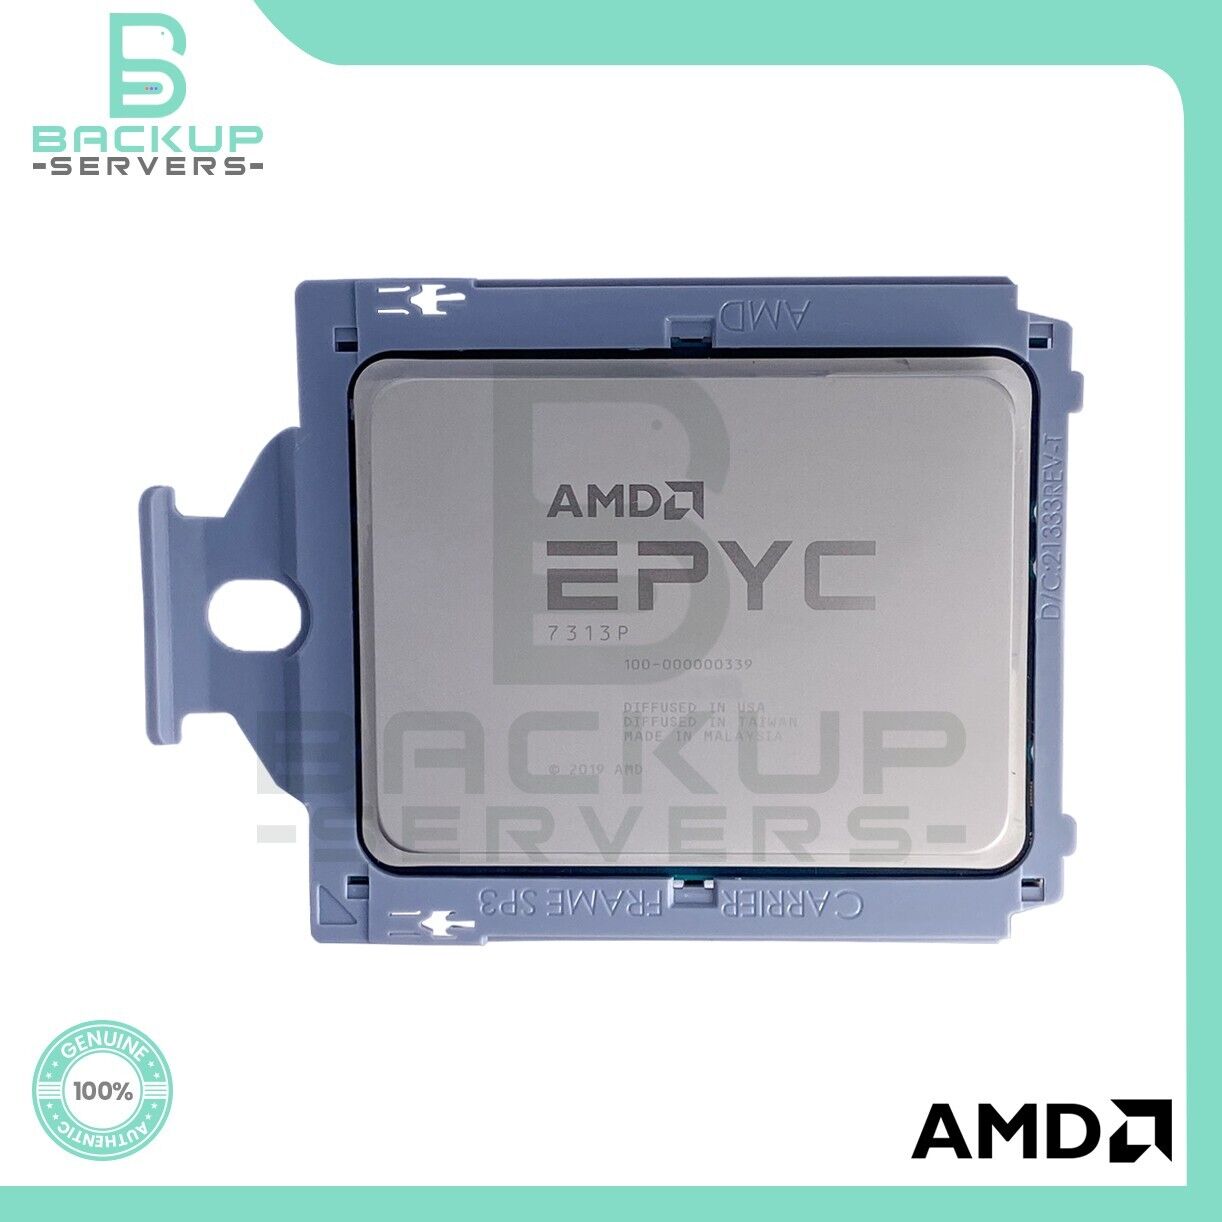 100-000000339 AMD EPYC Milan 7313P 16Core 3.0GHz 155W 128M Processor *Dell Only*